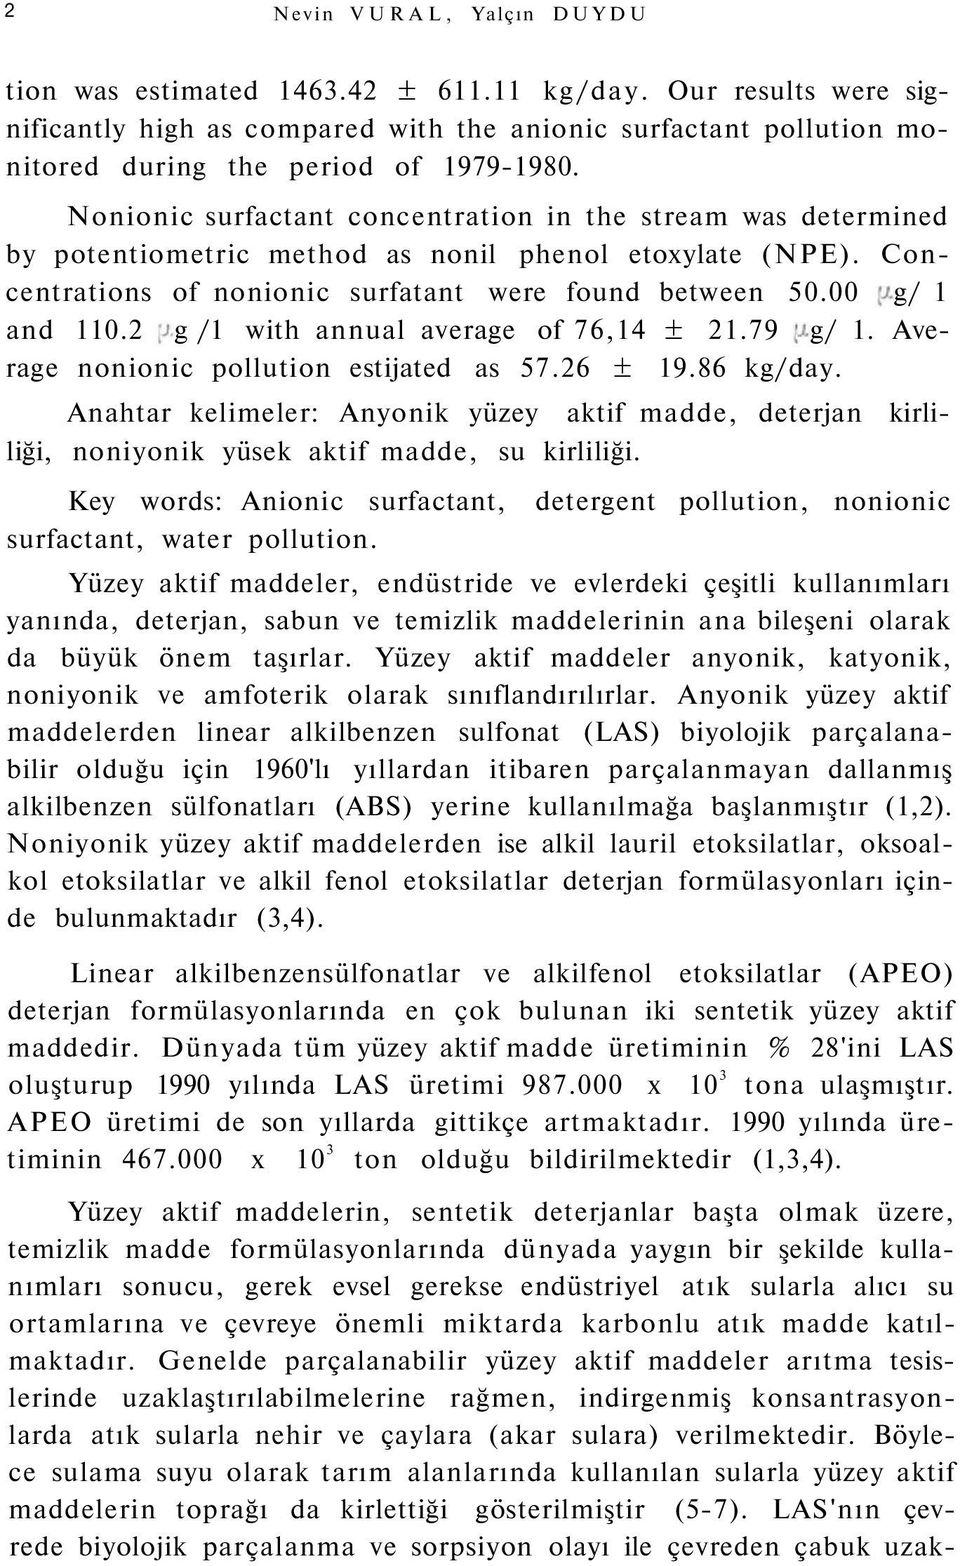 2 g /1 with annual average of 76,14 ± 21.79 g/ 1. Average nonionic pollution estijated as 57.26 ± 19.86 kg/day.